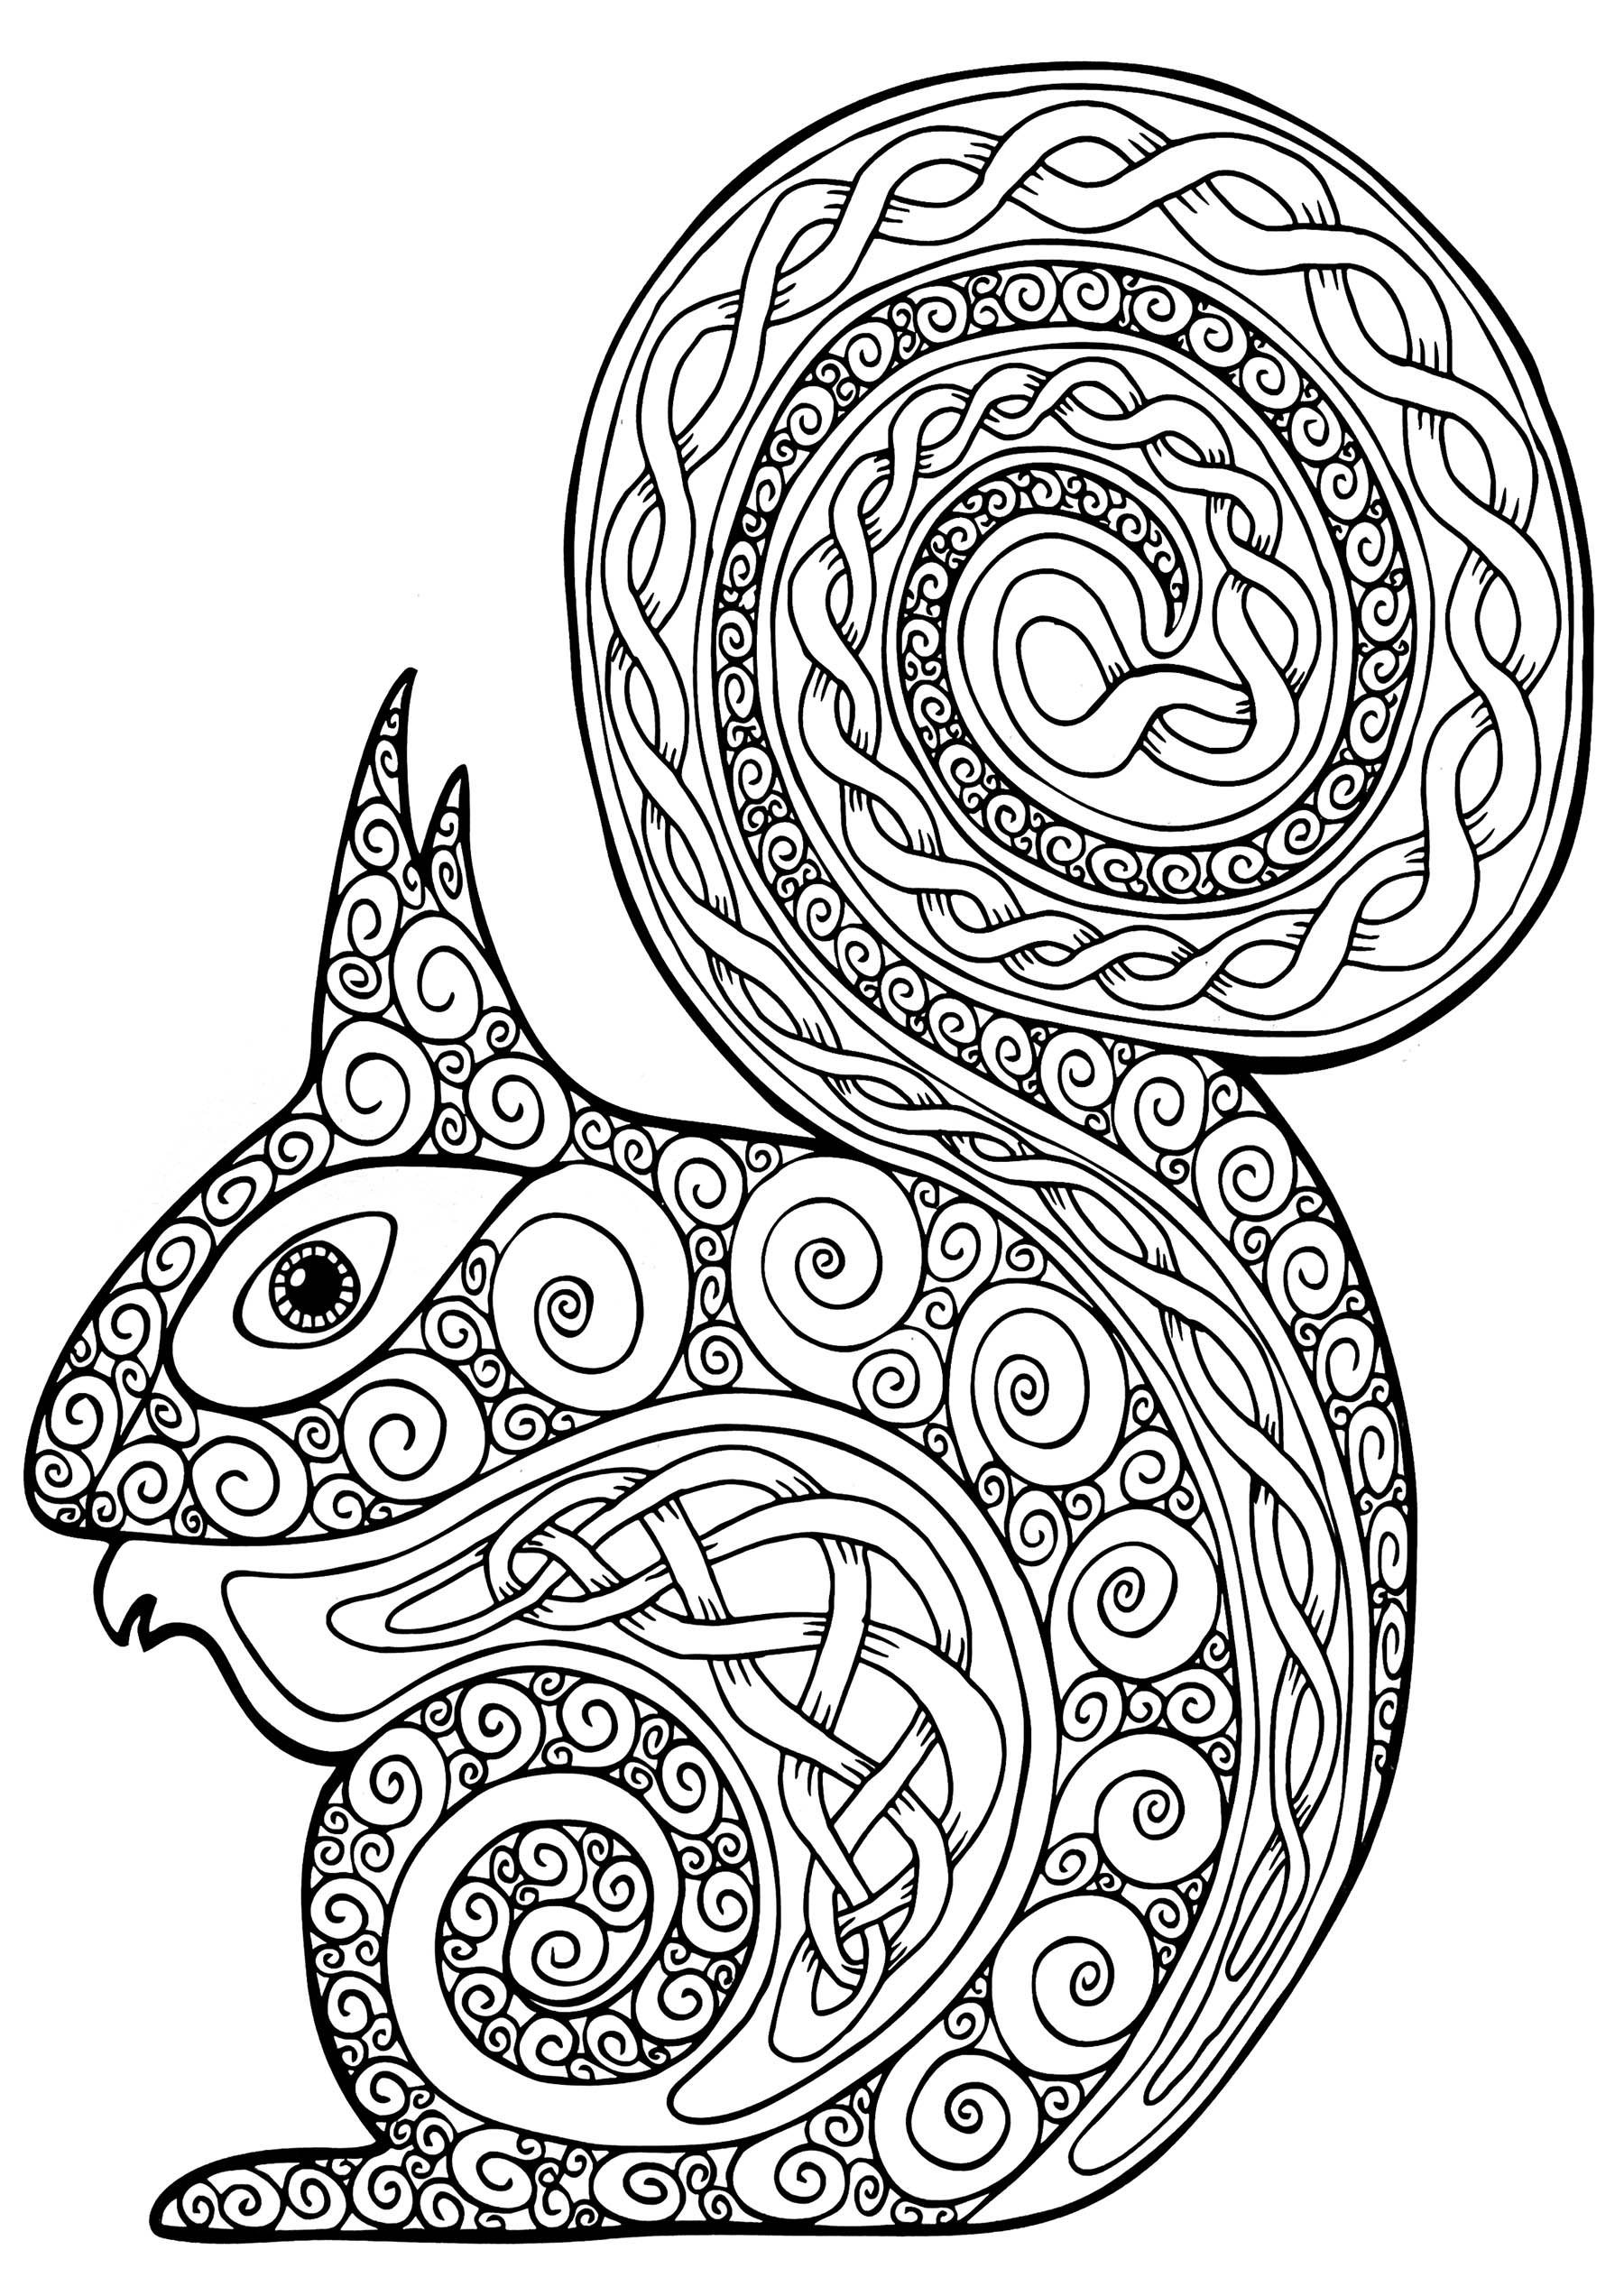 Squirrel full of various intertwined patterns